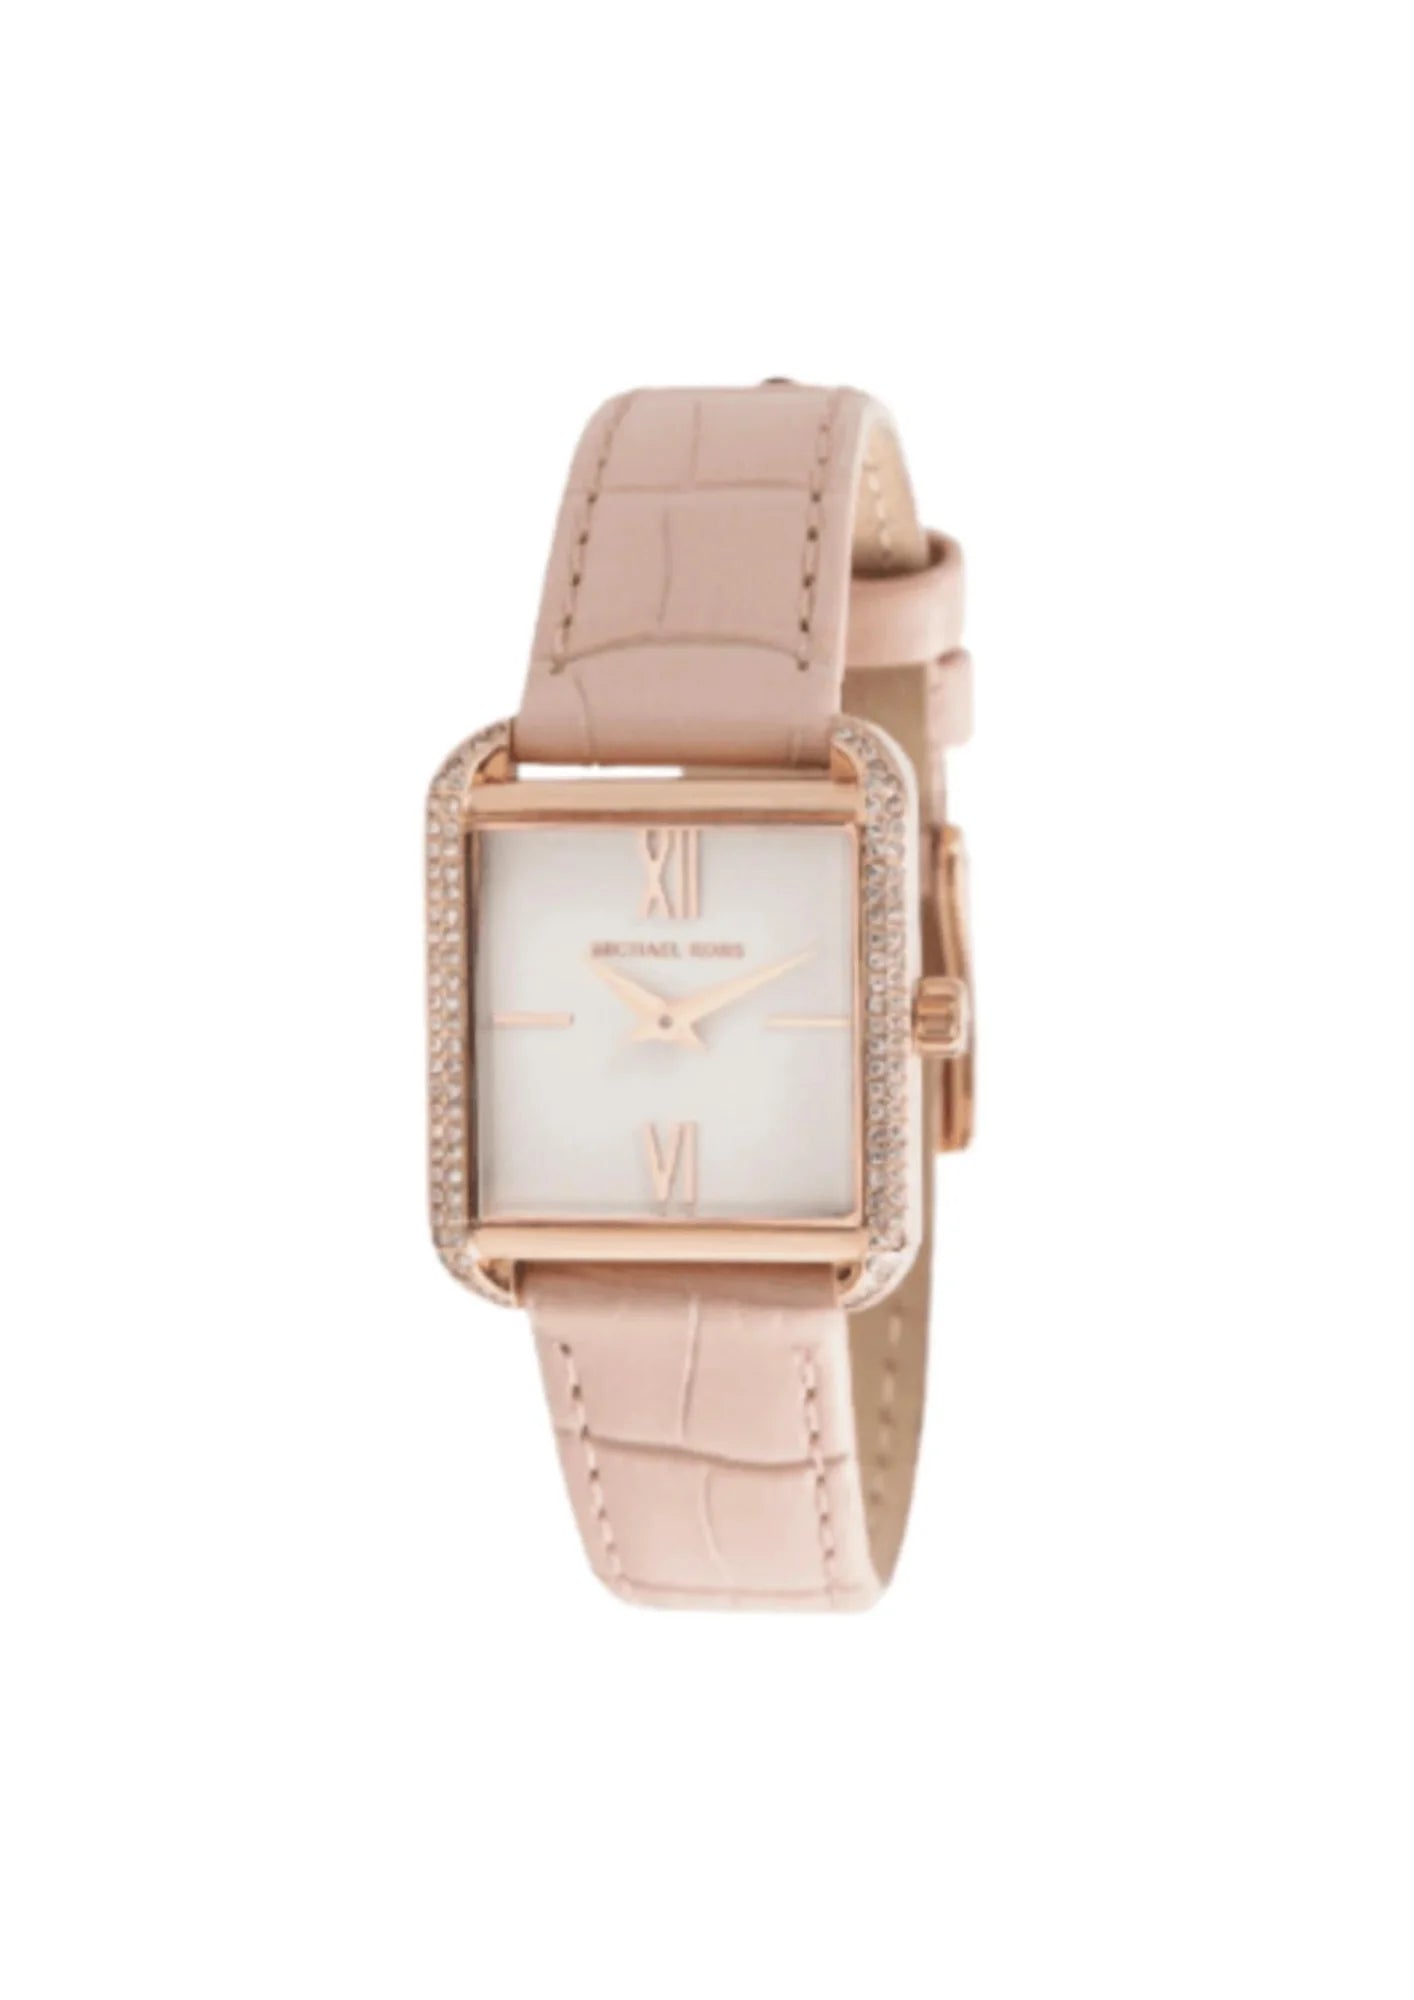 GOLD AND PINK WATCH